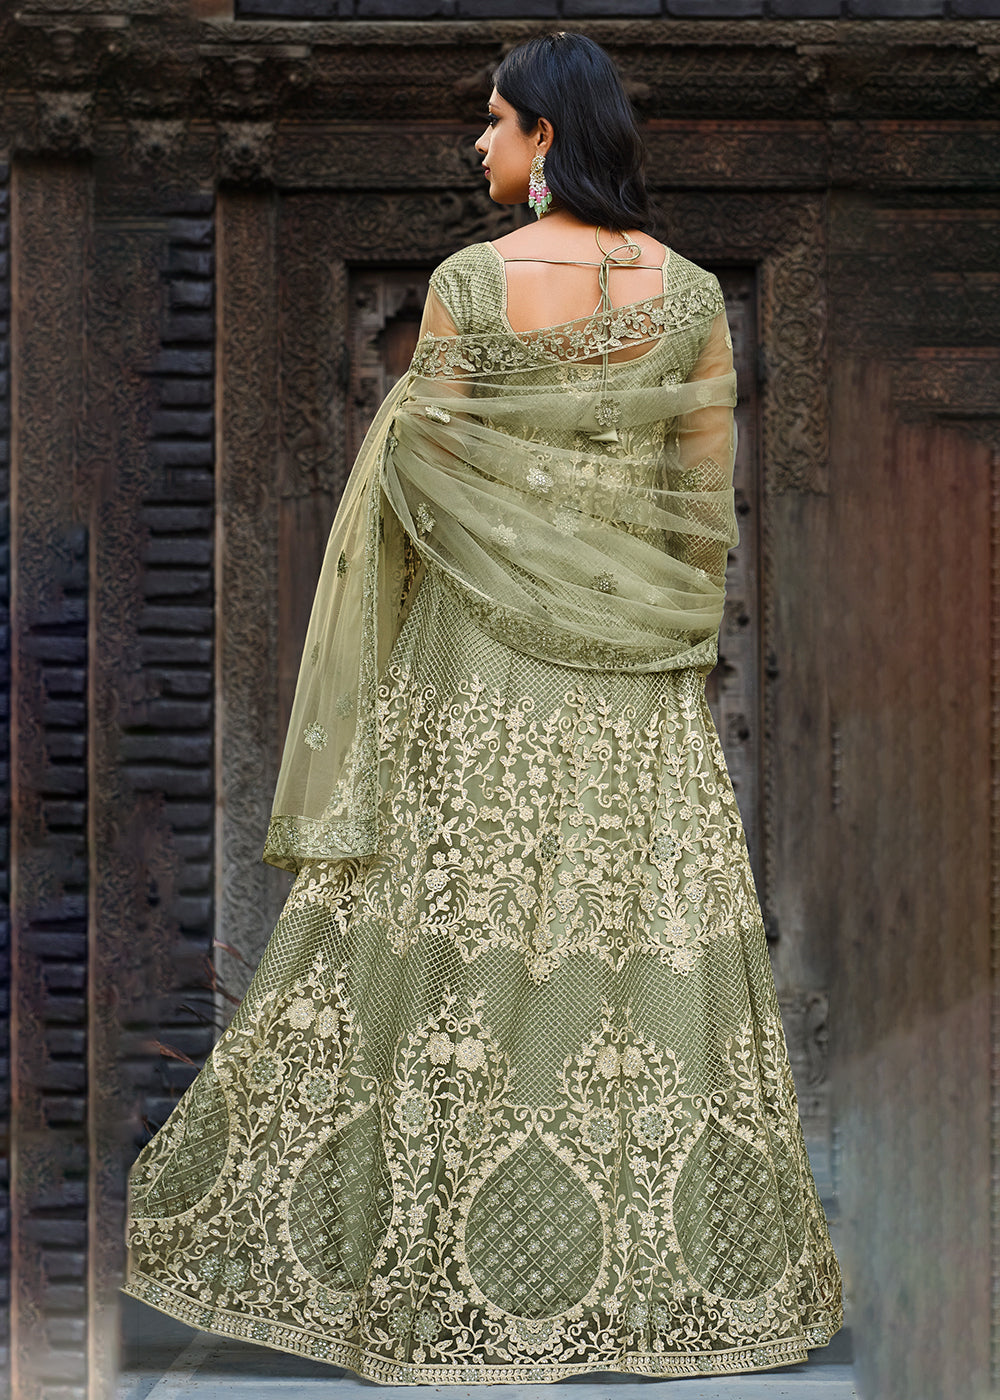 Buy Now Thread Stone Embroidered Stunning Green Wedding Anarkali Suit Online in USA, UK, Australia, New Zealand, Canada, Italy & Worldwide at Empress Clothing. 